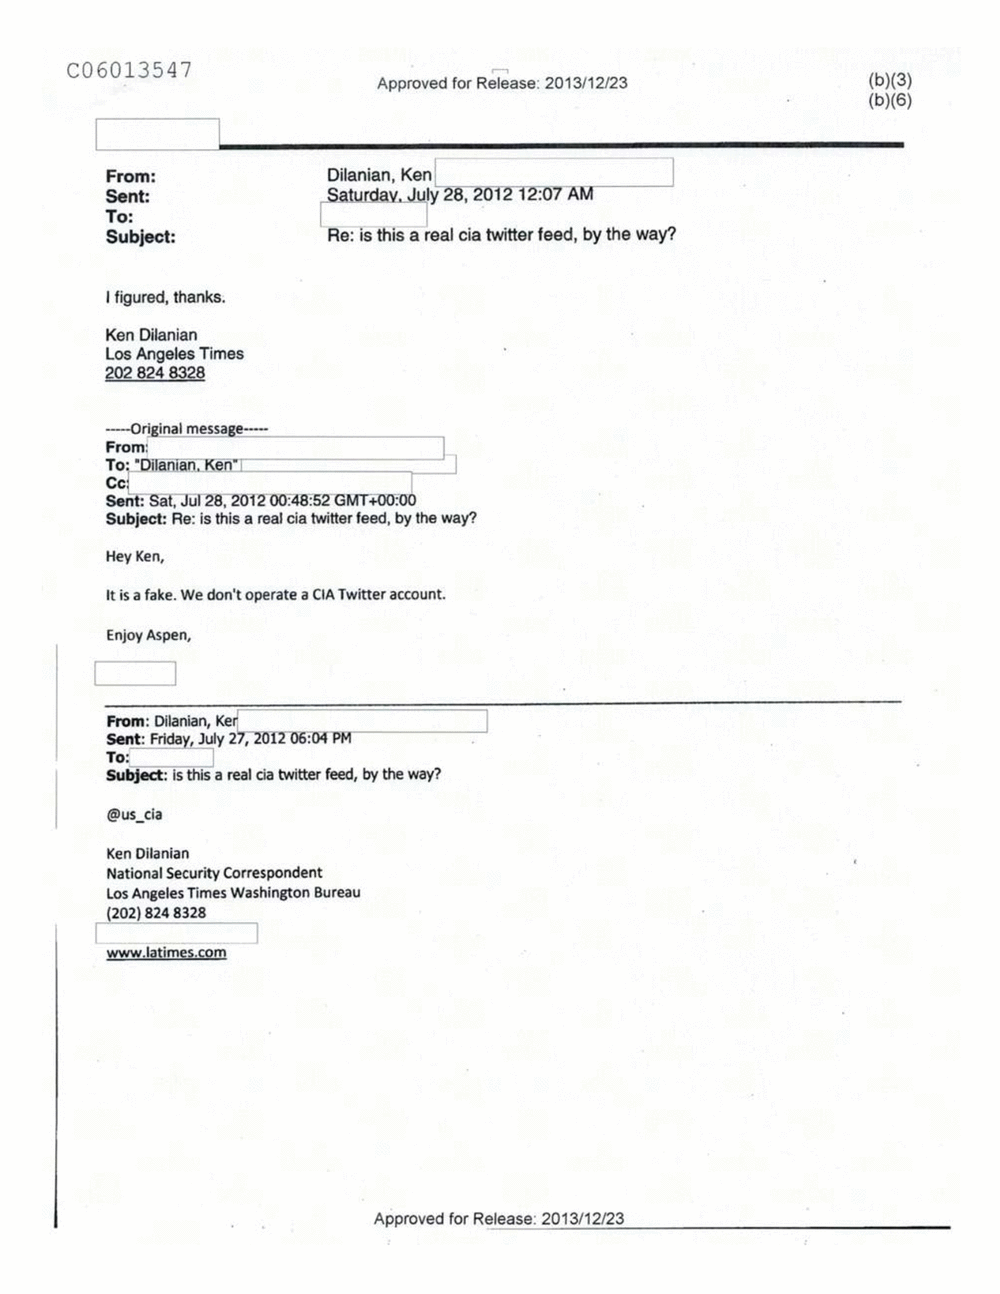 Page 409 from Email Correspondence Between Reporters and CIA Flacks